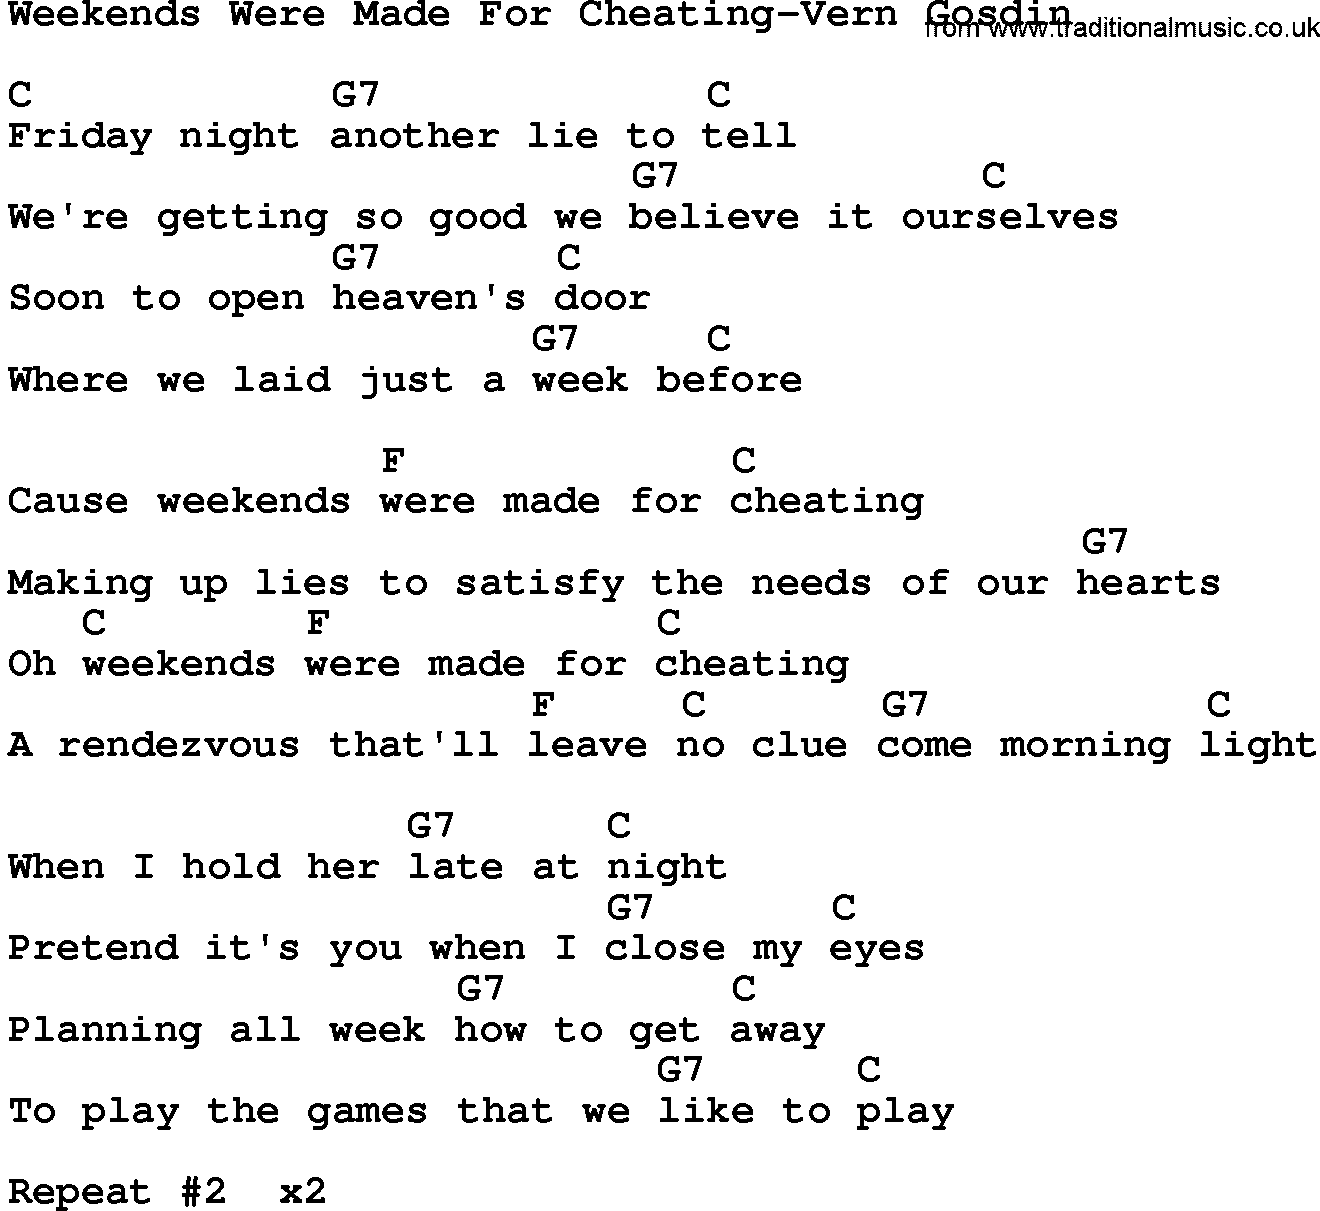 Country music song: Weekends Were Made For Cheating-Vern Gosdin lyrics and chords